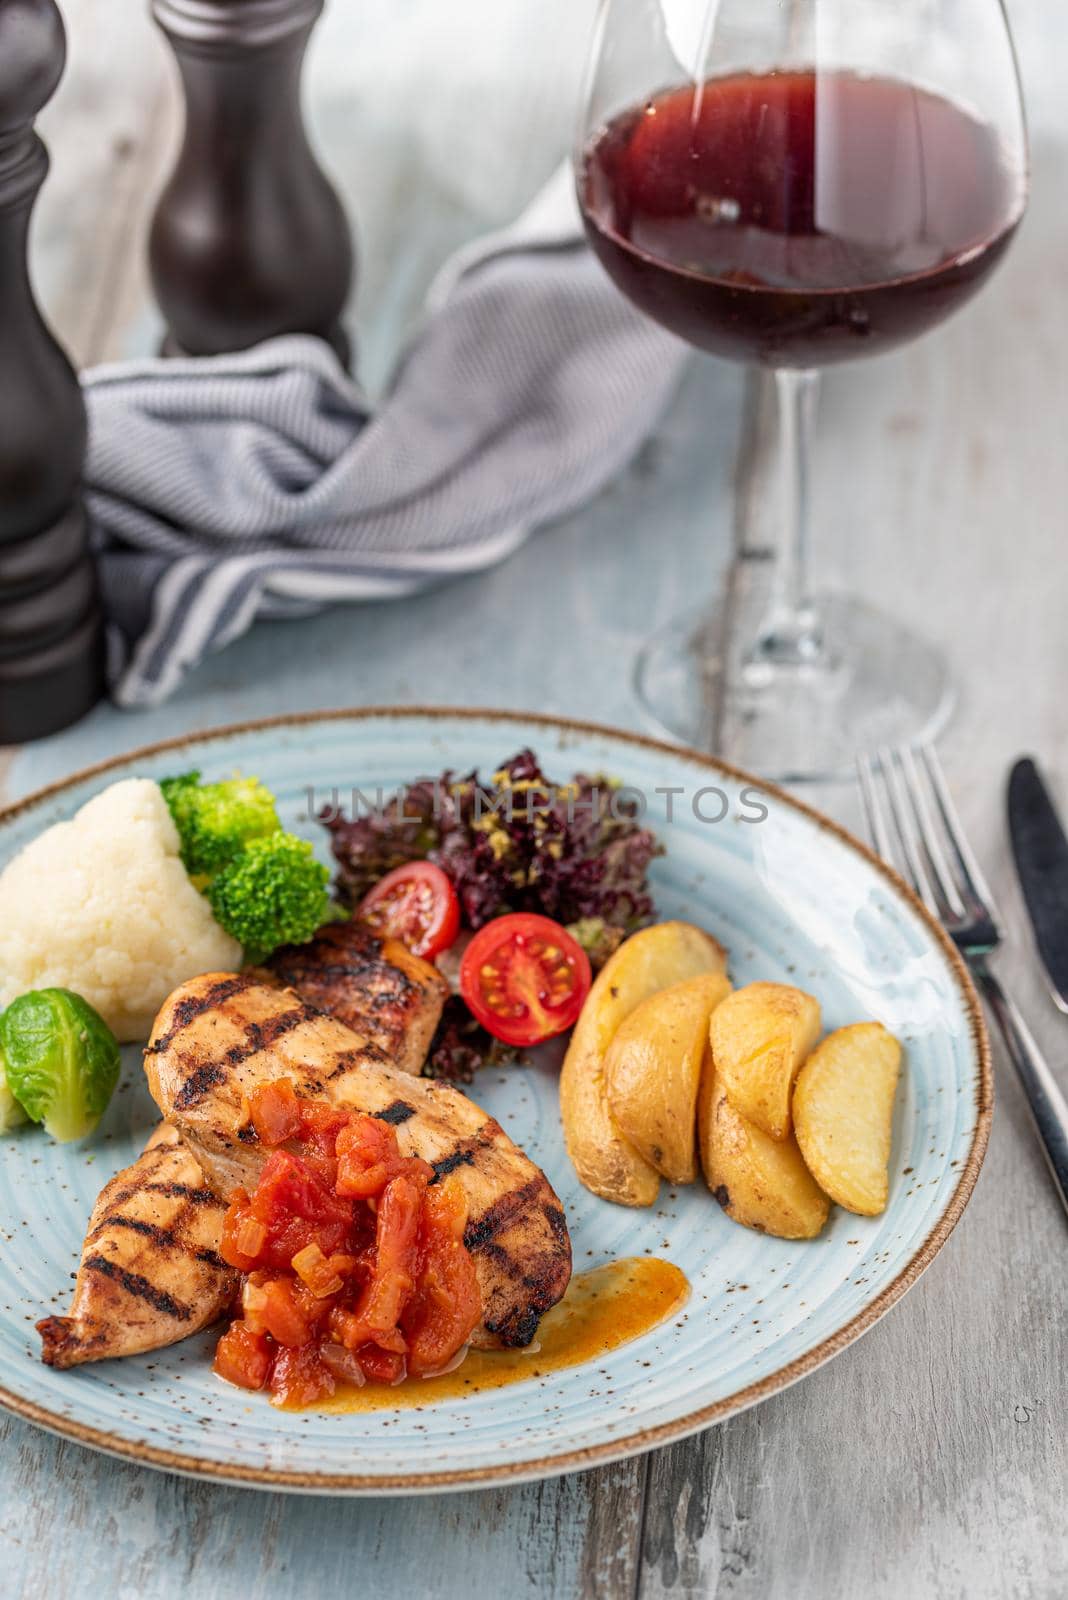 Grilled chicken breast by Sonat